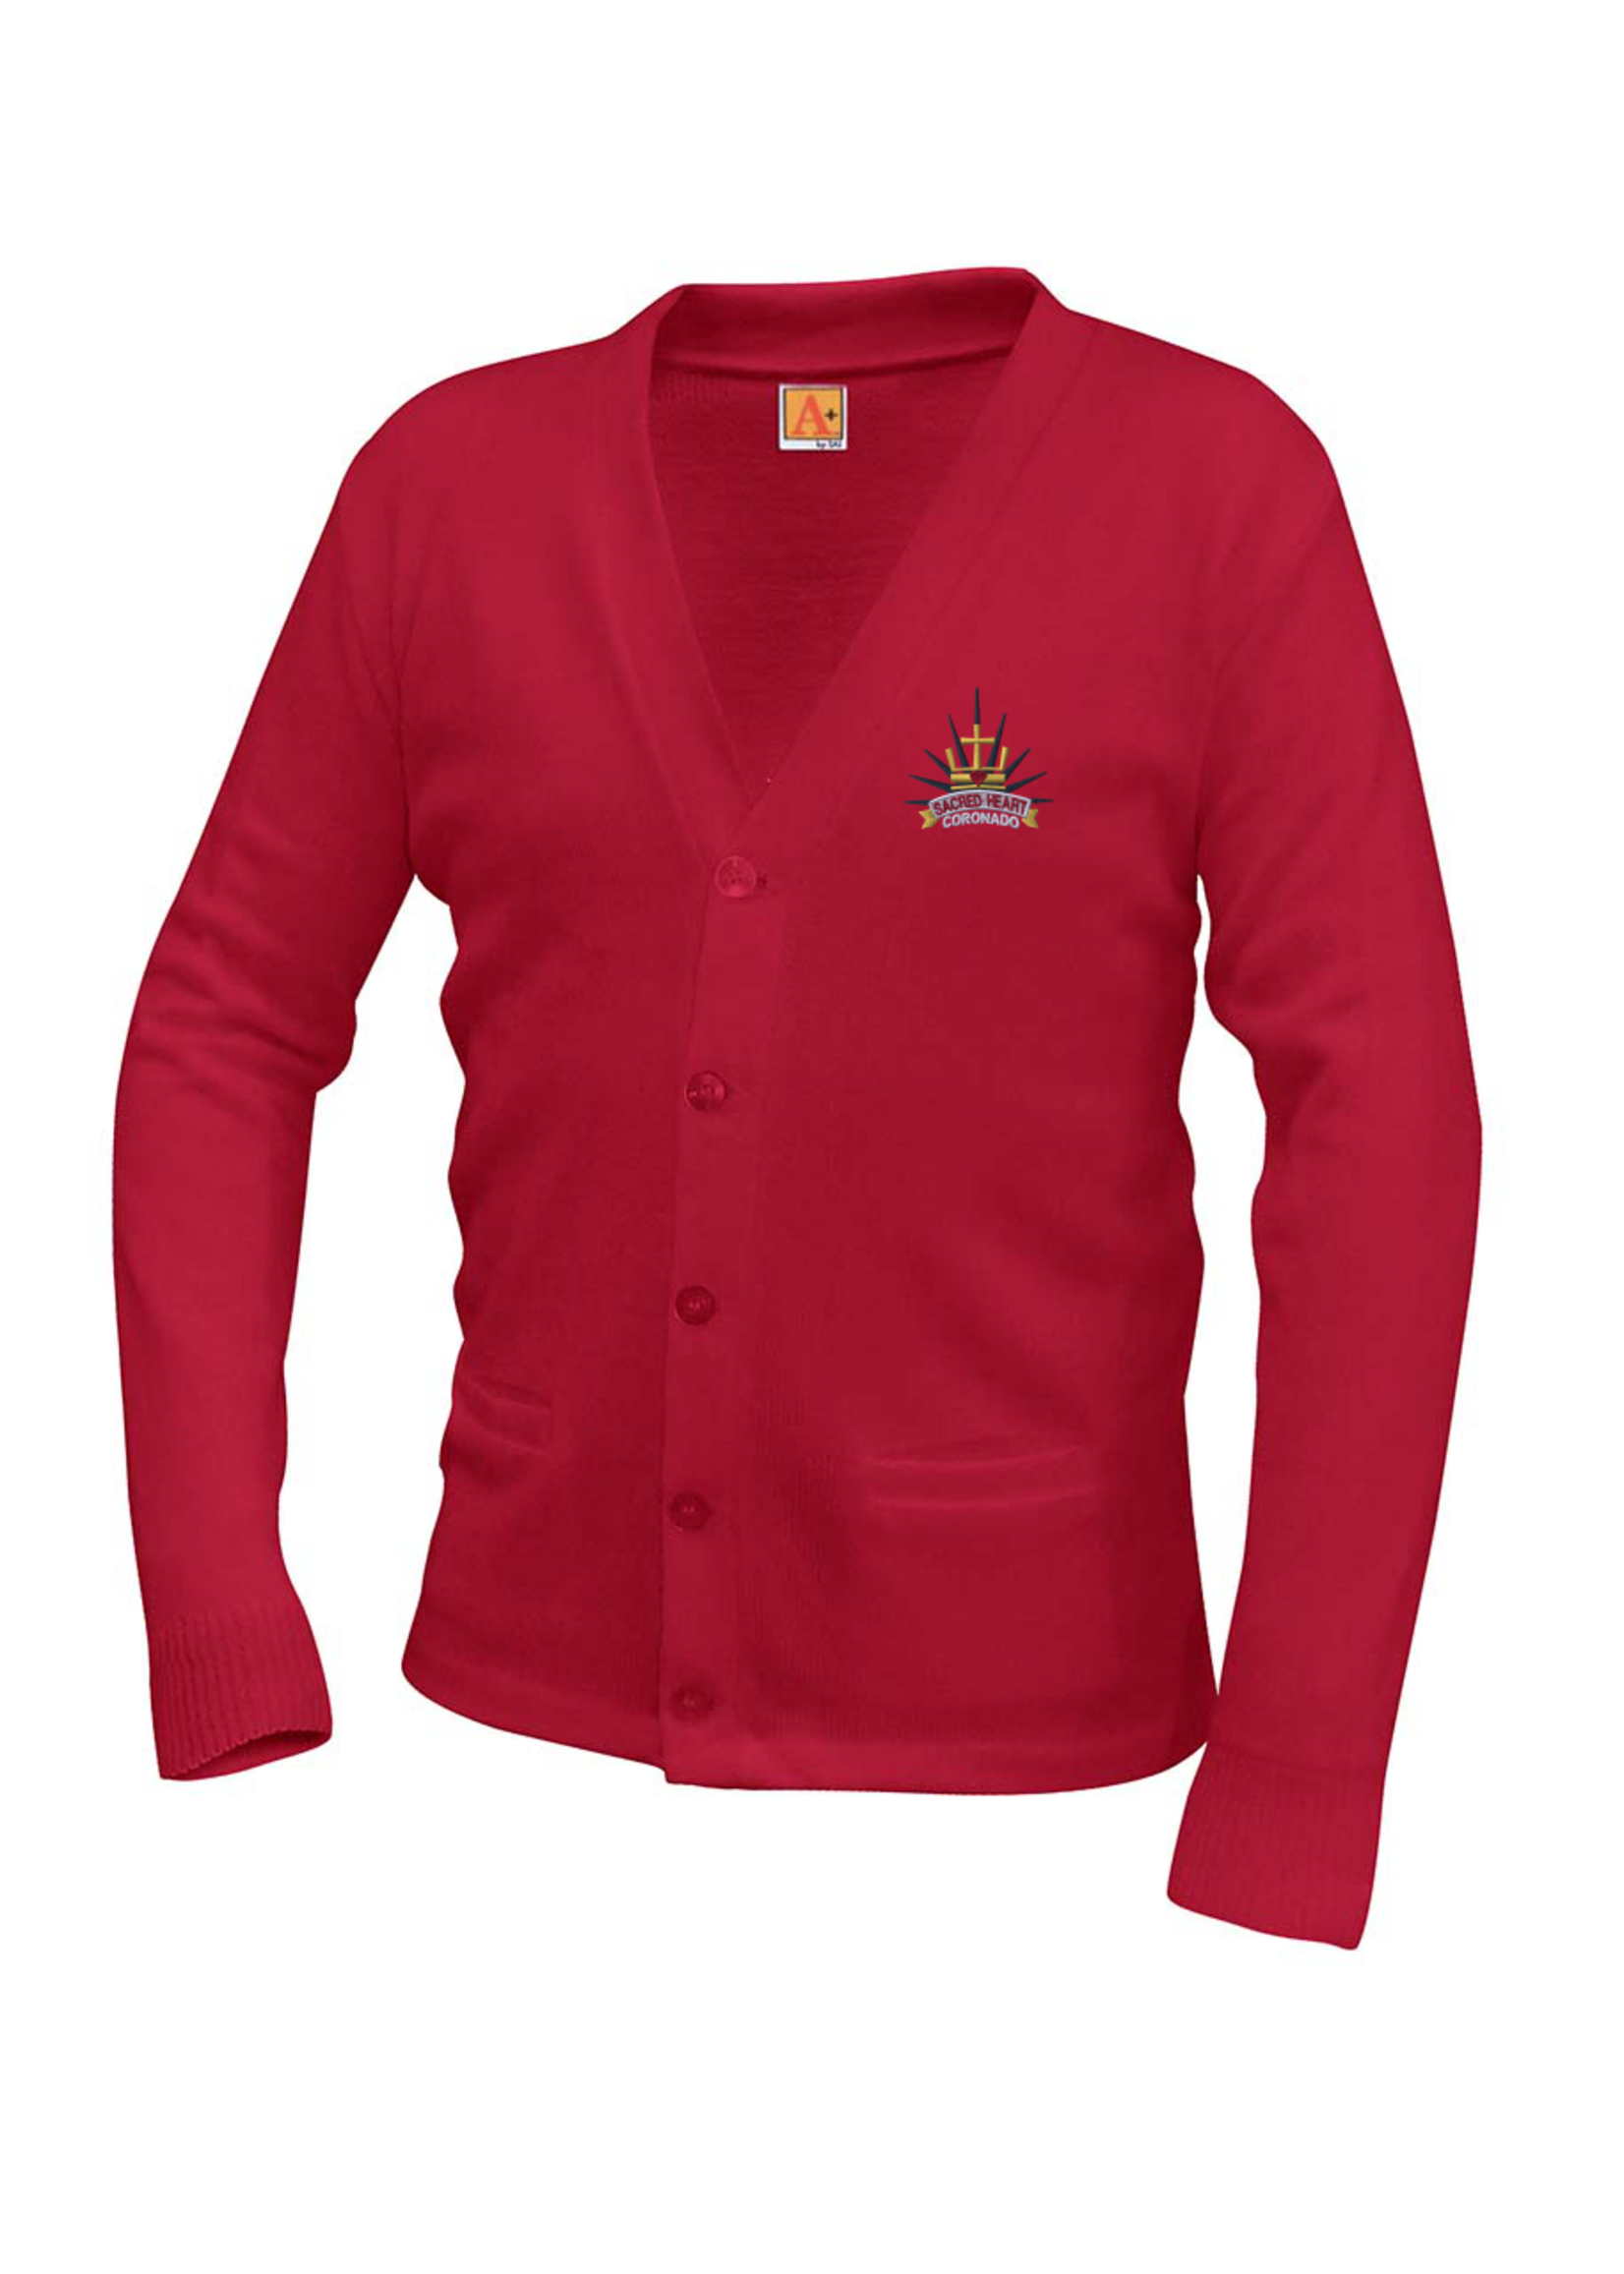 SHPS Red V-neck cardigan sweater with pockets